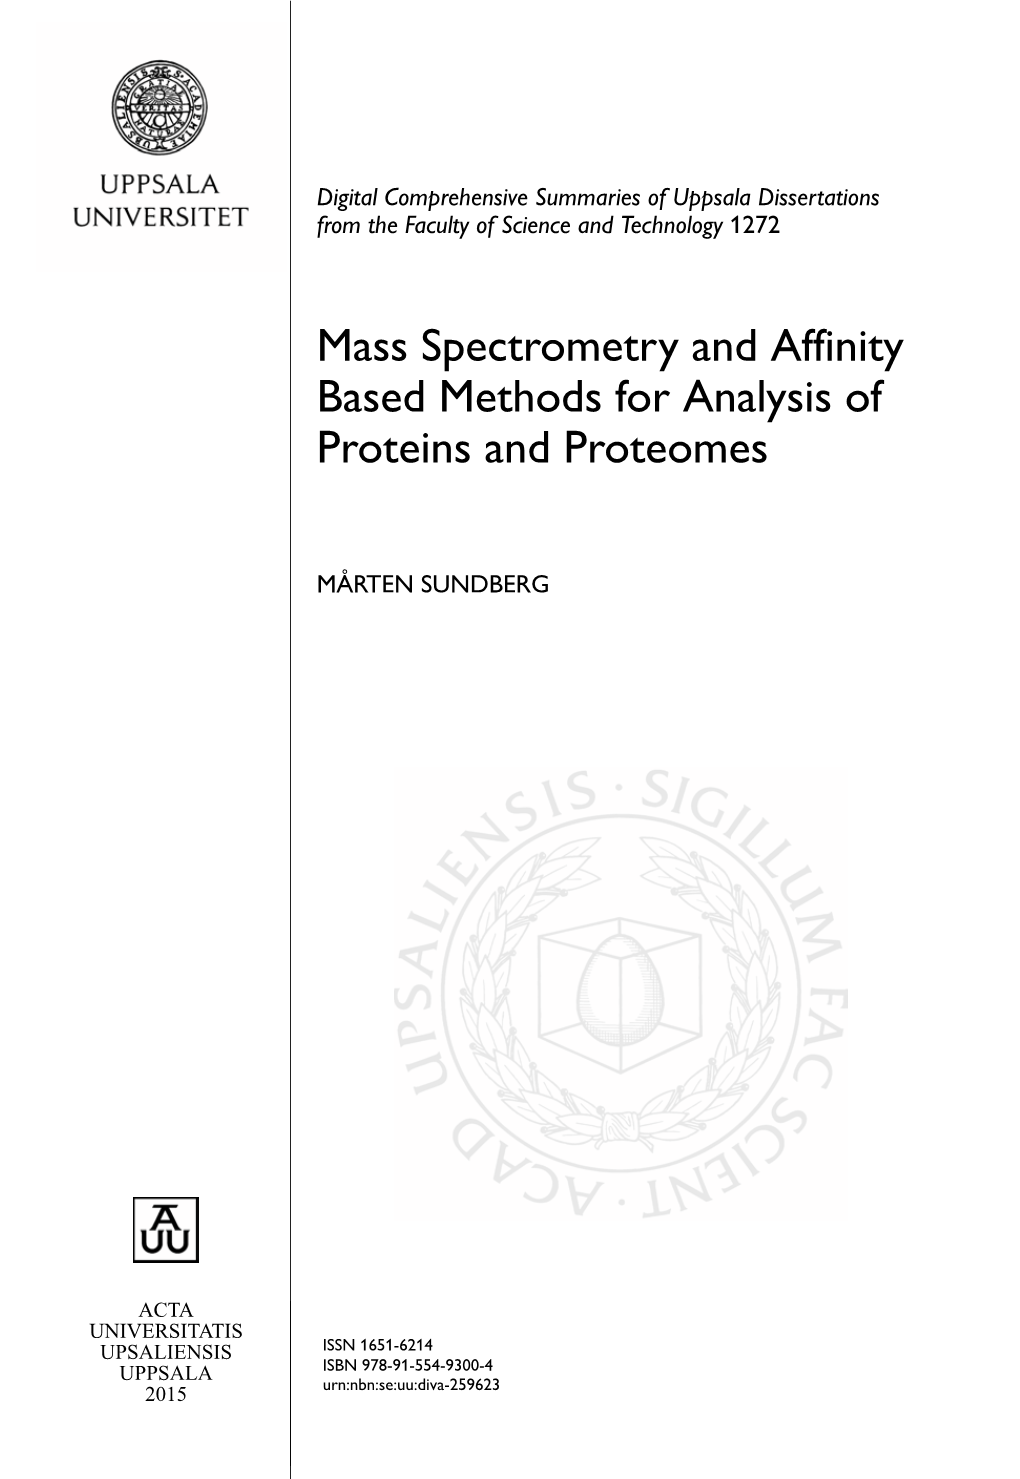 Mass Spectrometry and Affinity Based Methods for Analysis of Proteins and Proteomes